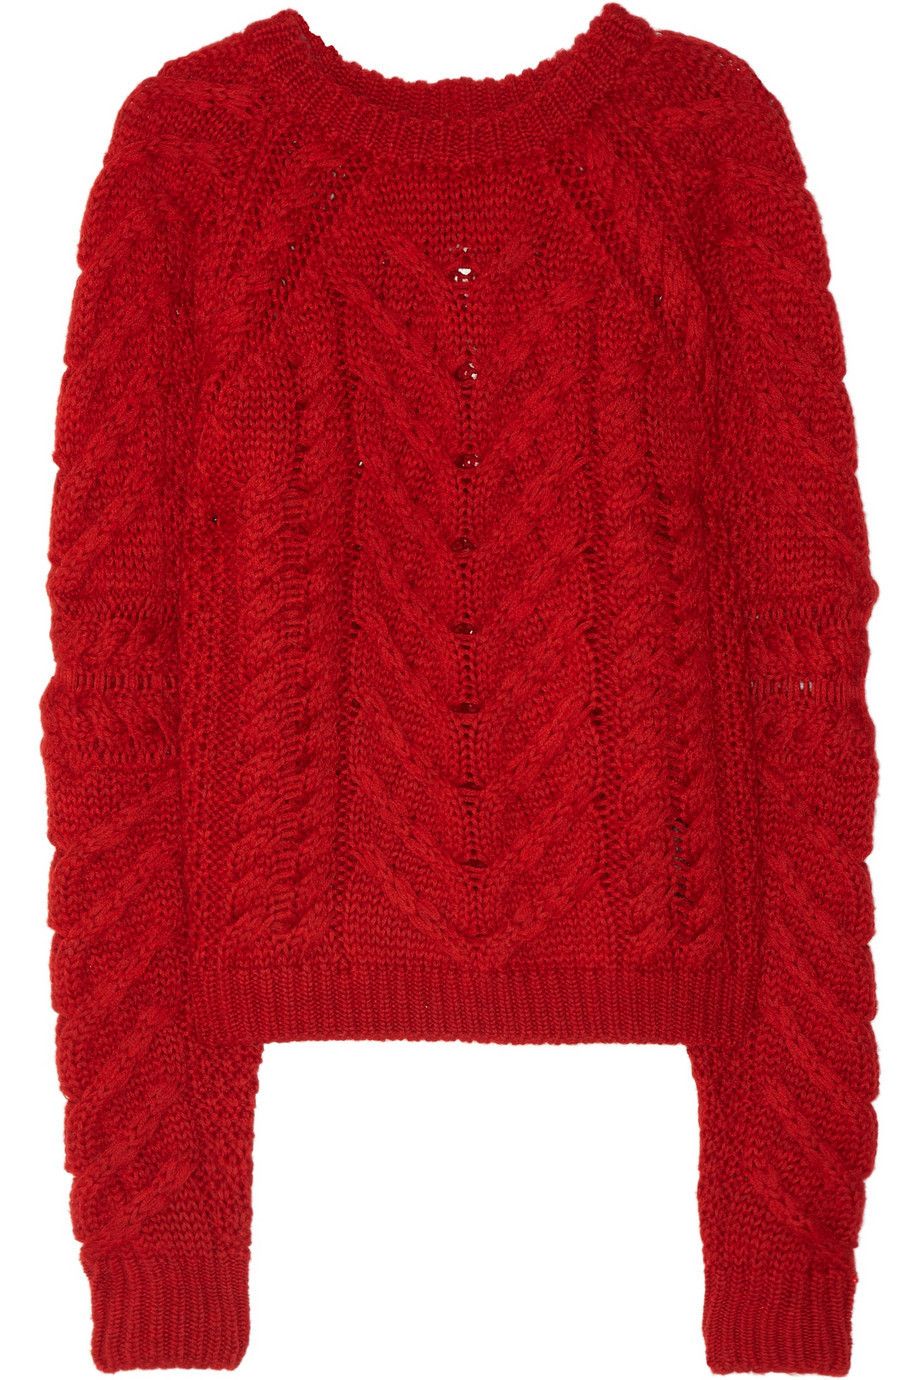 Sweater, Product, Sleeve, Textile, Red, Wool, Woolen, Pattern, Knitting, Baby & toddler clothing, 